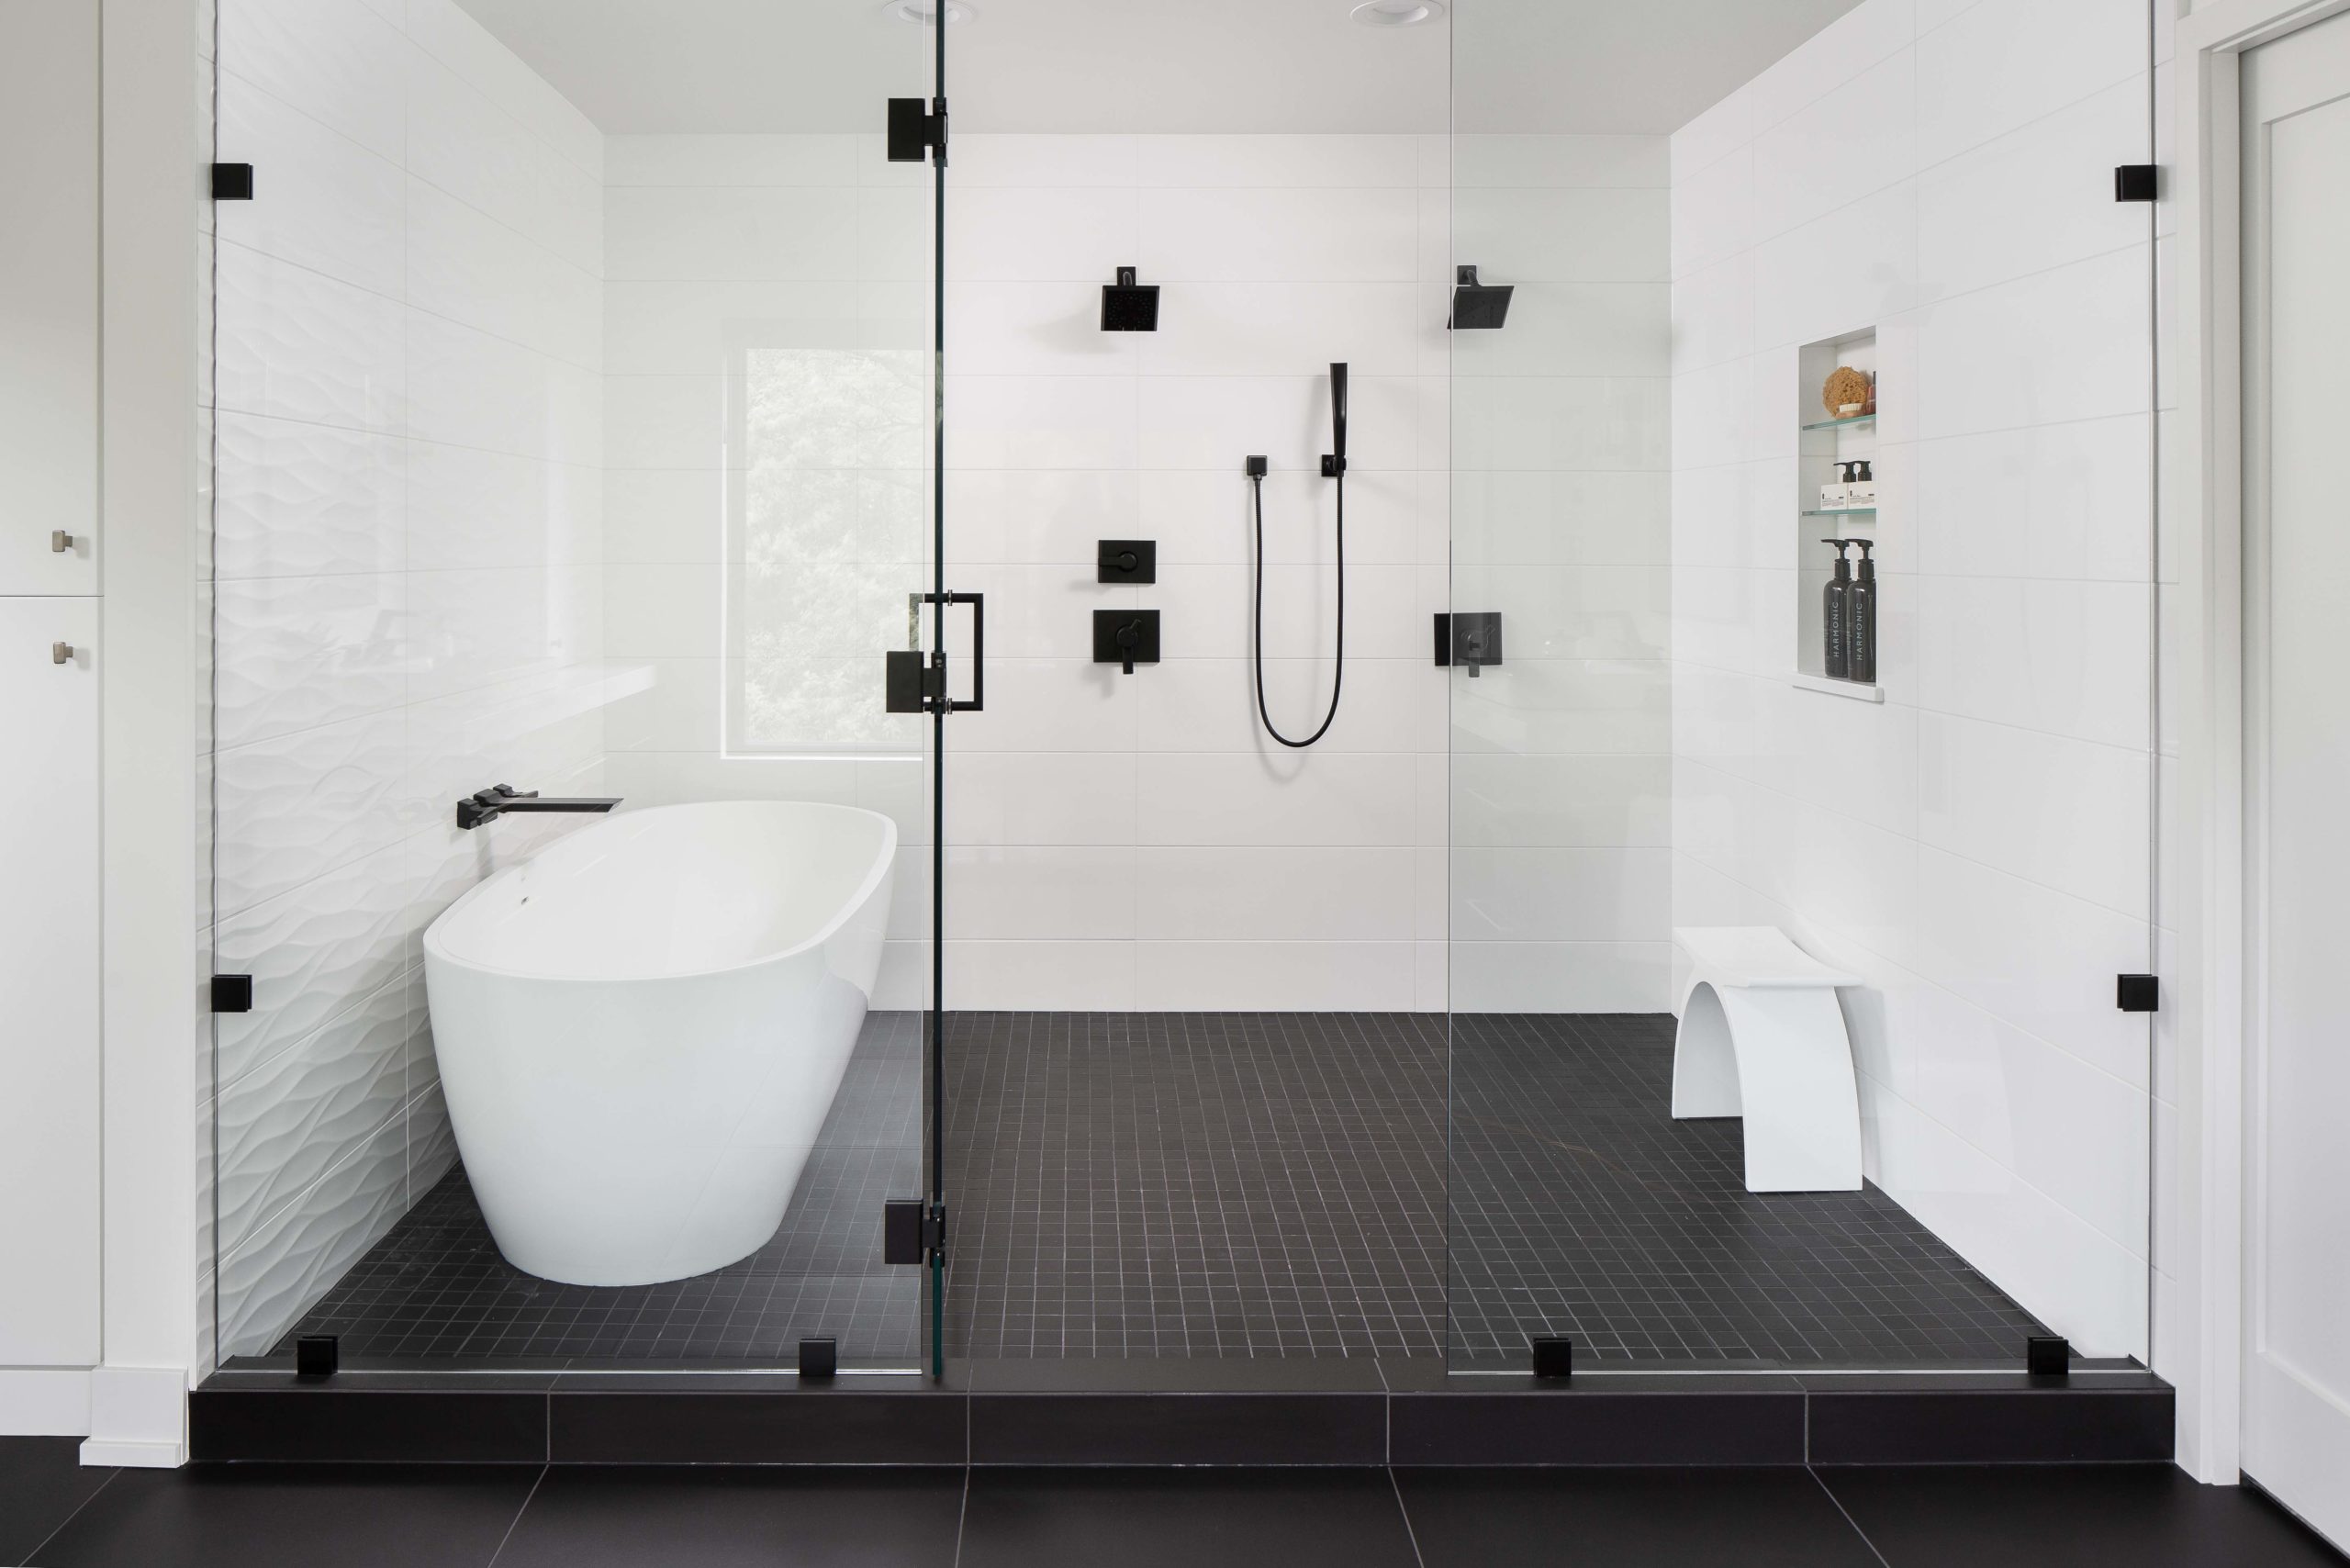 A modern bathroom remodel with glass shower doors.